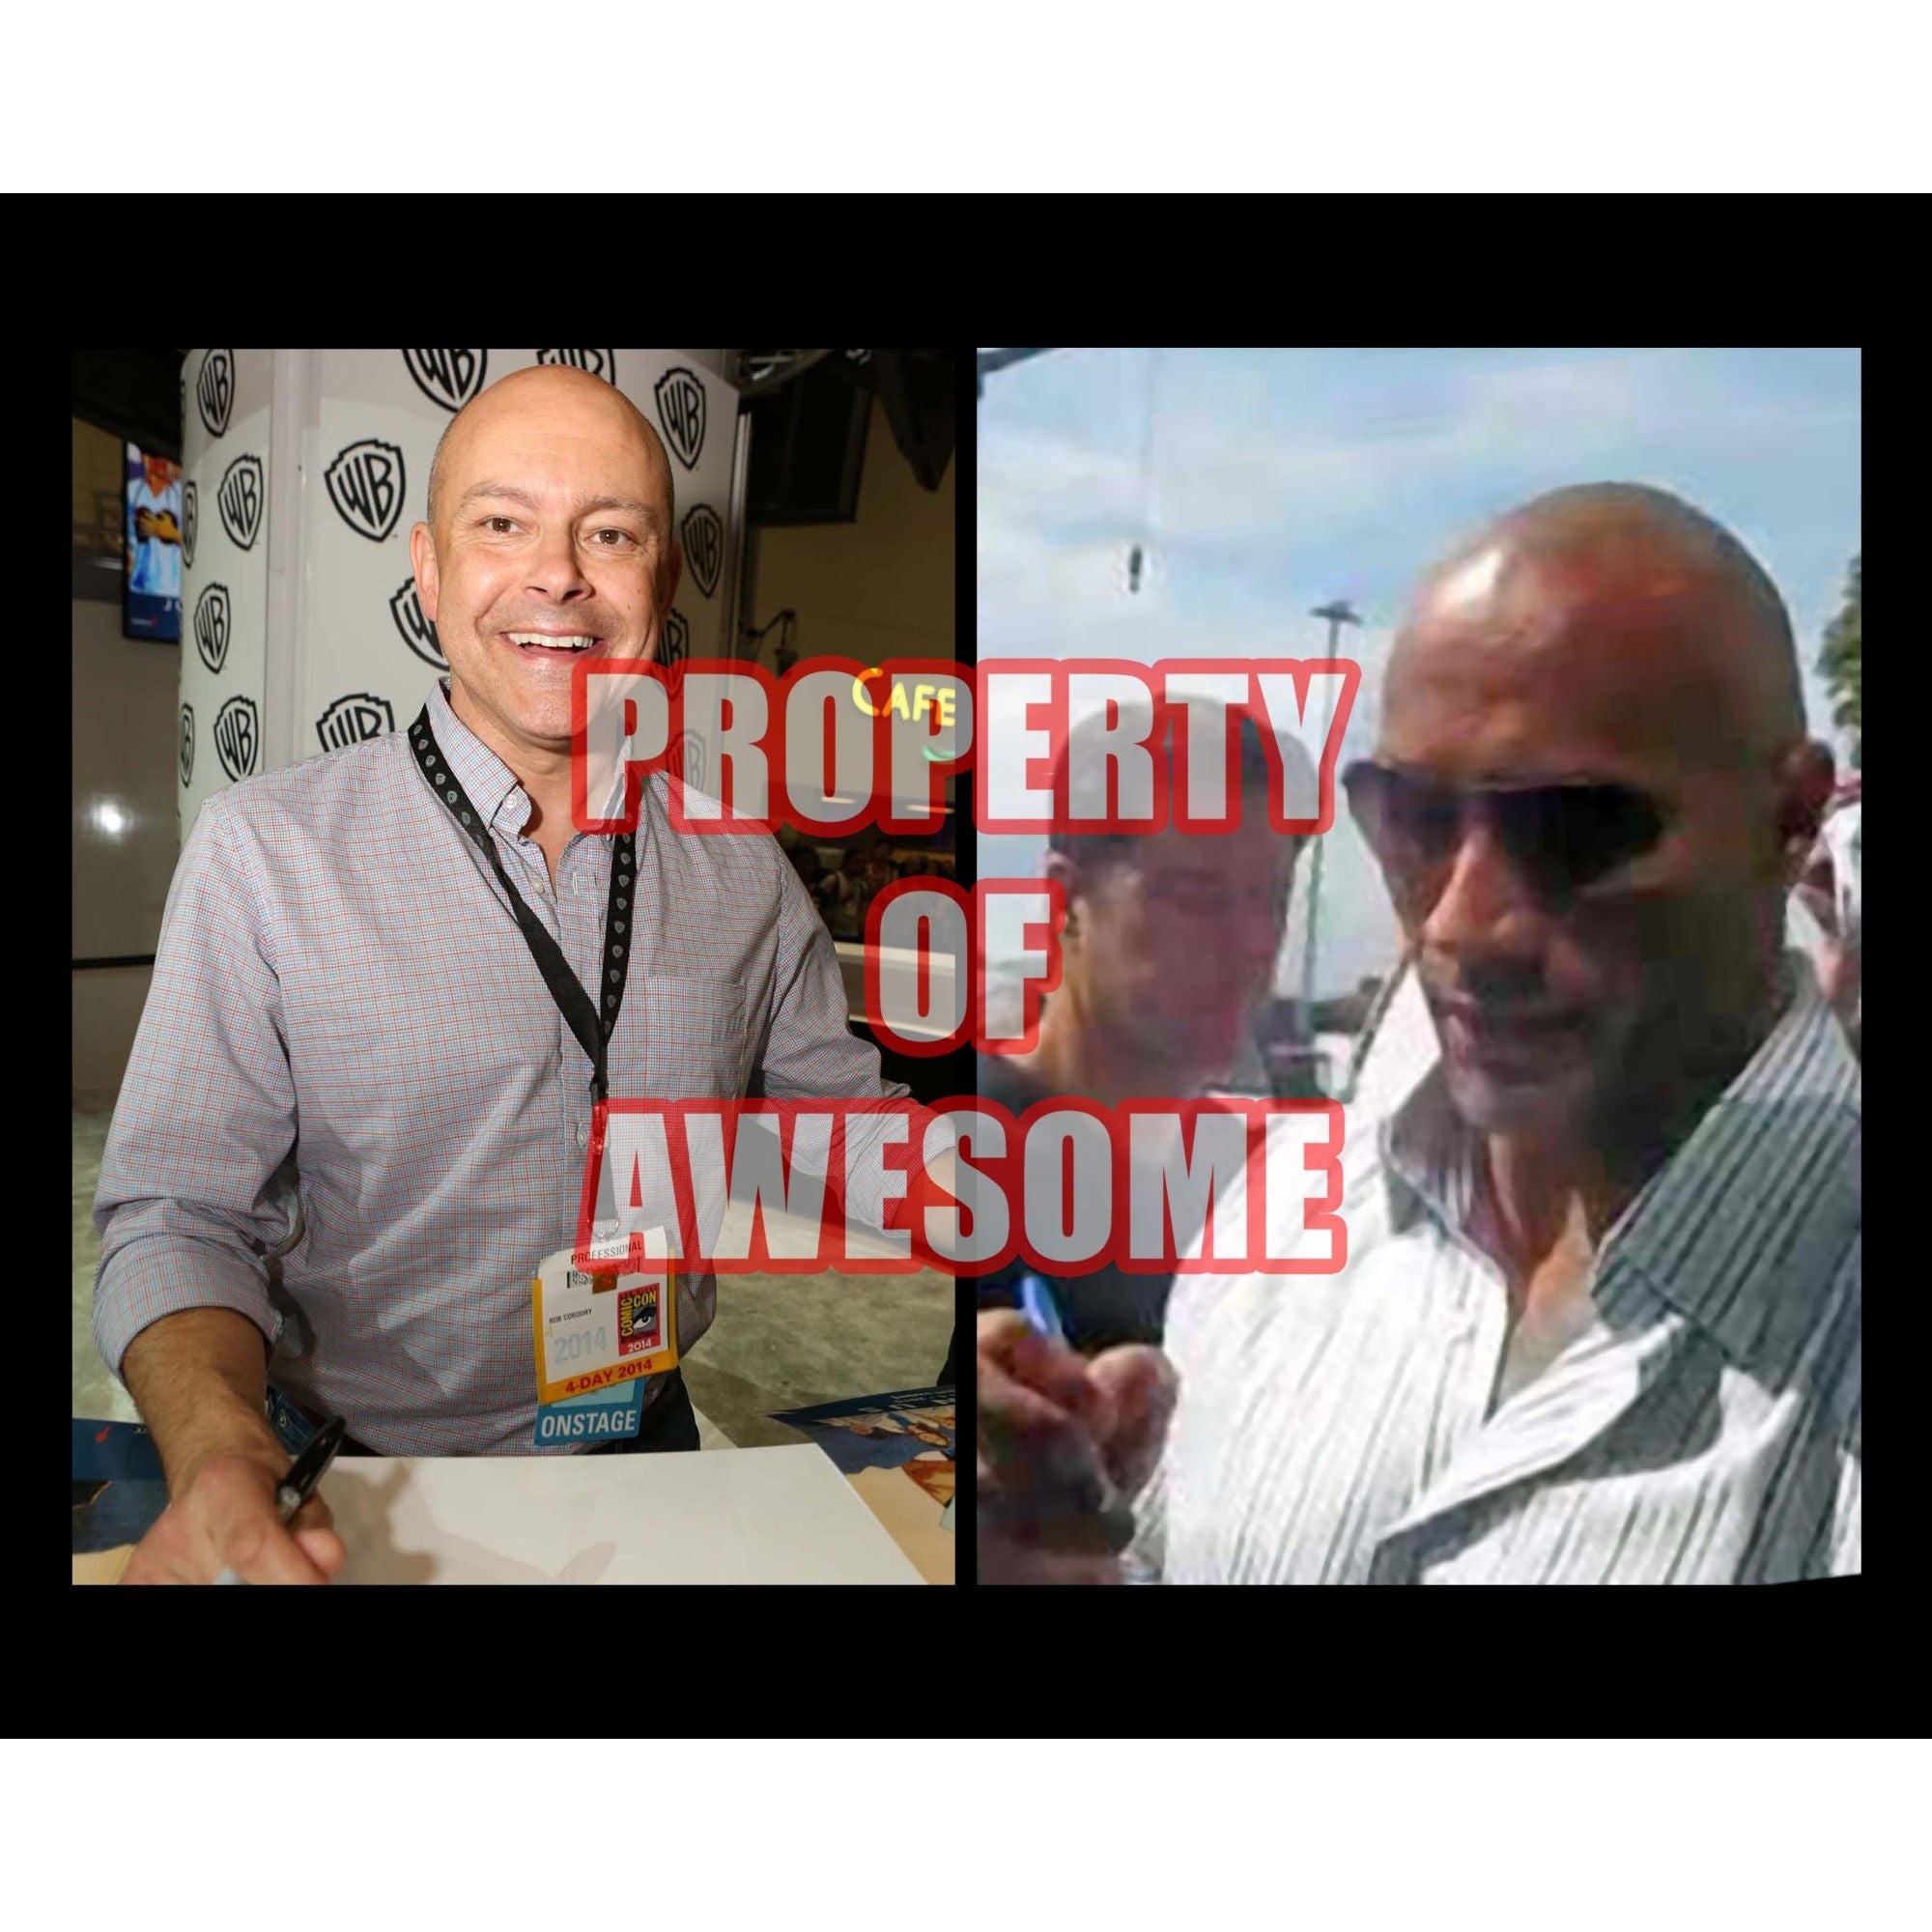 Dwayne "The Rock" Johnson, Rob Corddry 'Ballers' 8 x 10 signed with proof